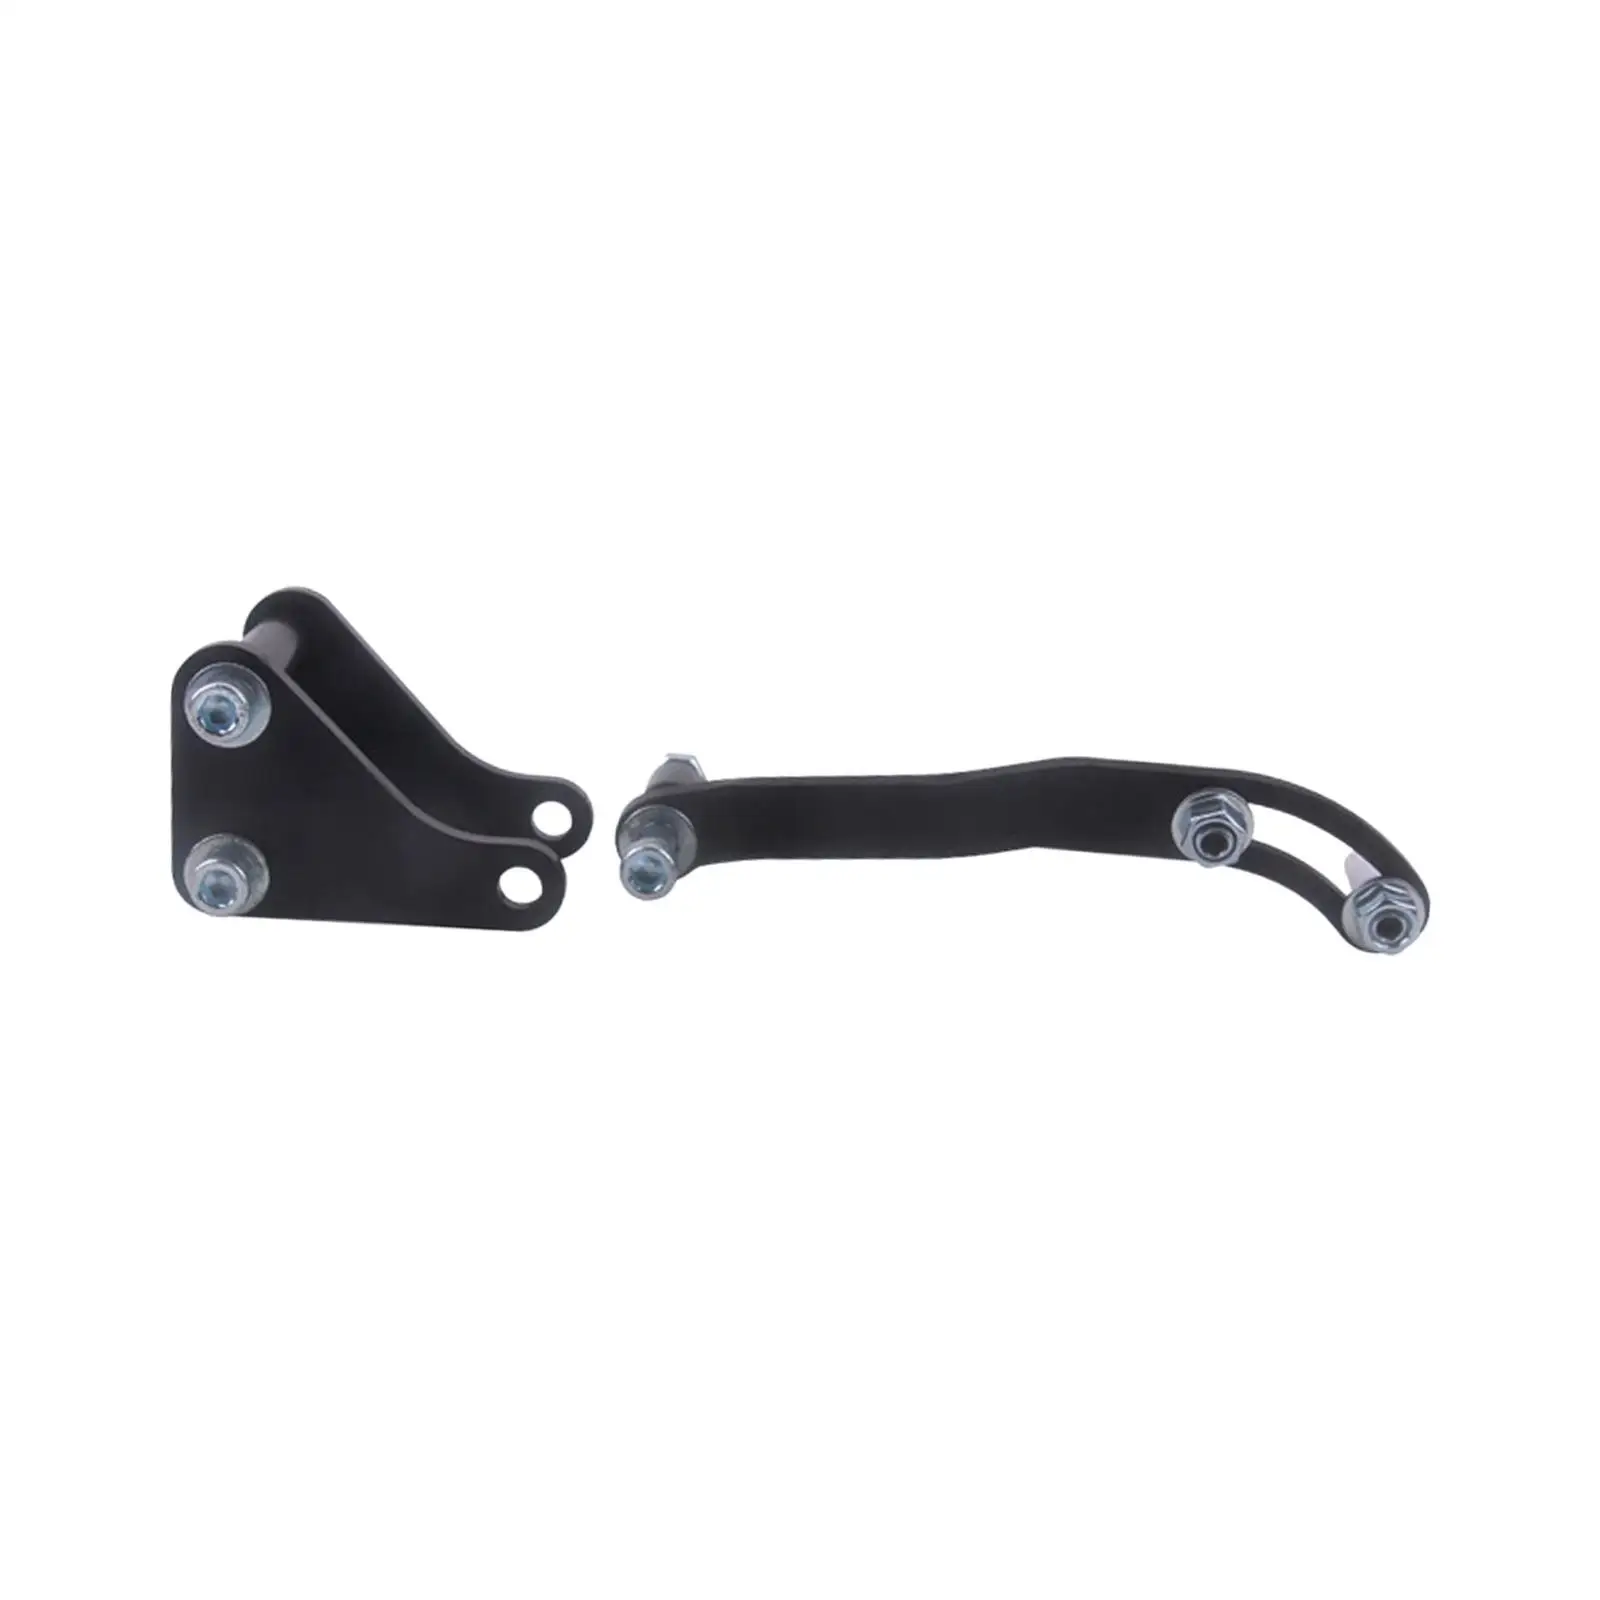 Black Power Steering Pump Mounting Bracket Easy Installation Accessory Replaces for Chevy Sbc Engine 350 283 327 400